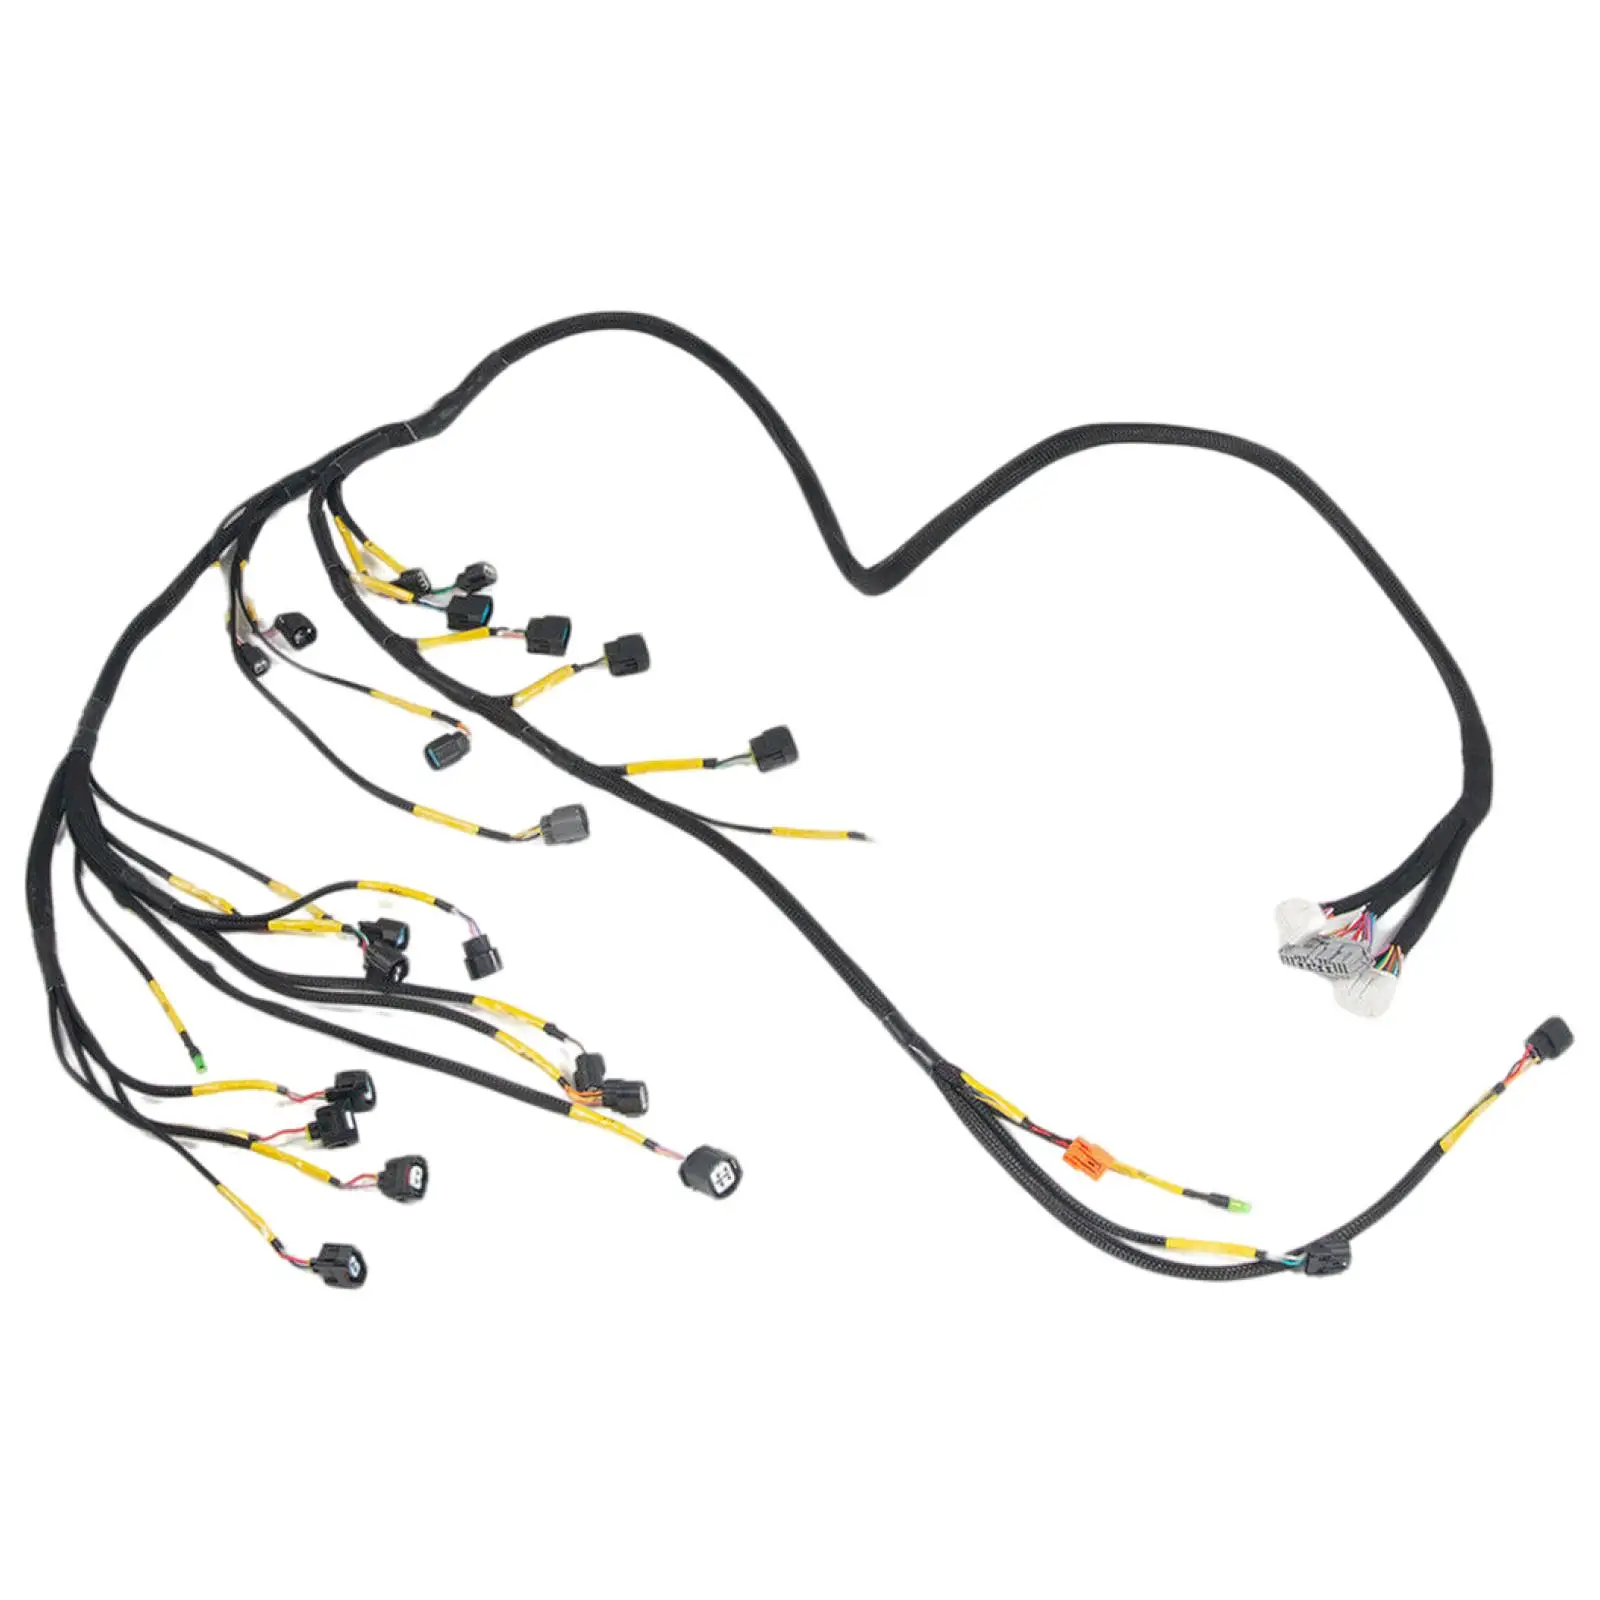 K20 K24 K Series Tucked Engine Harness Fits for K Swap for RSX Type S